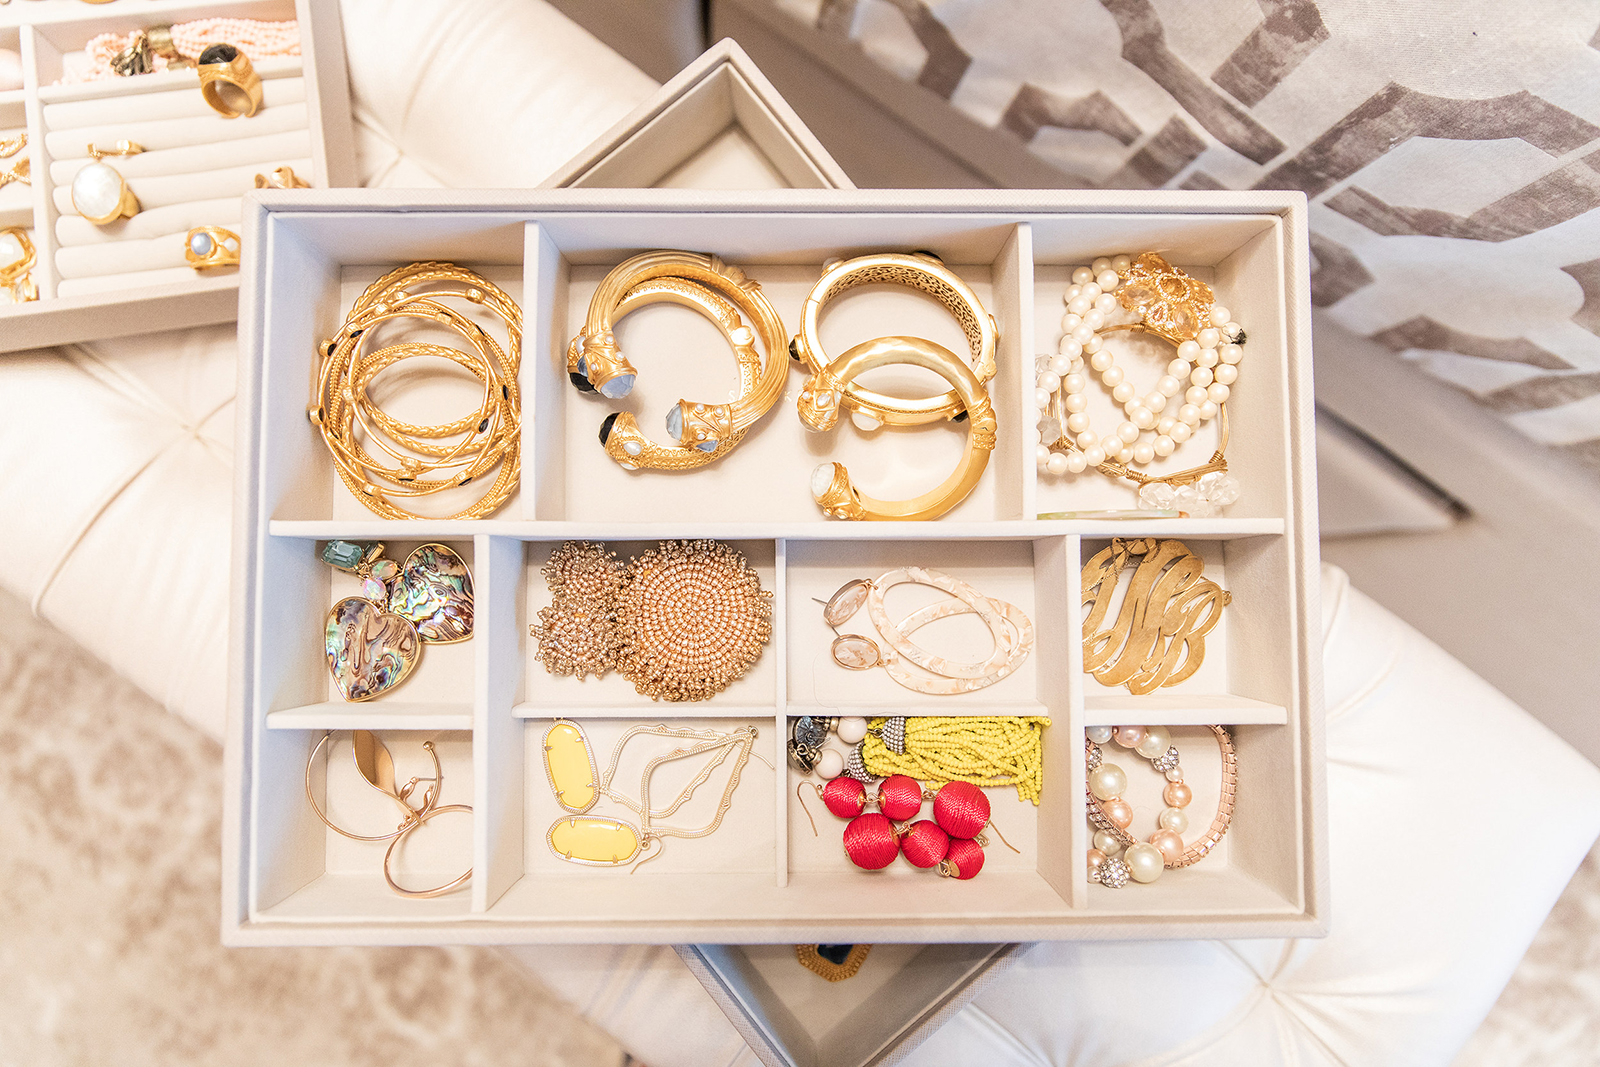 MY JEWELRY COLLECTION & ORGANIZATION, organise my jewelry & Louis